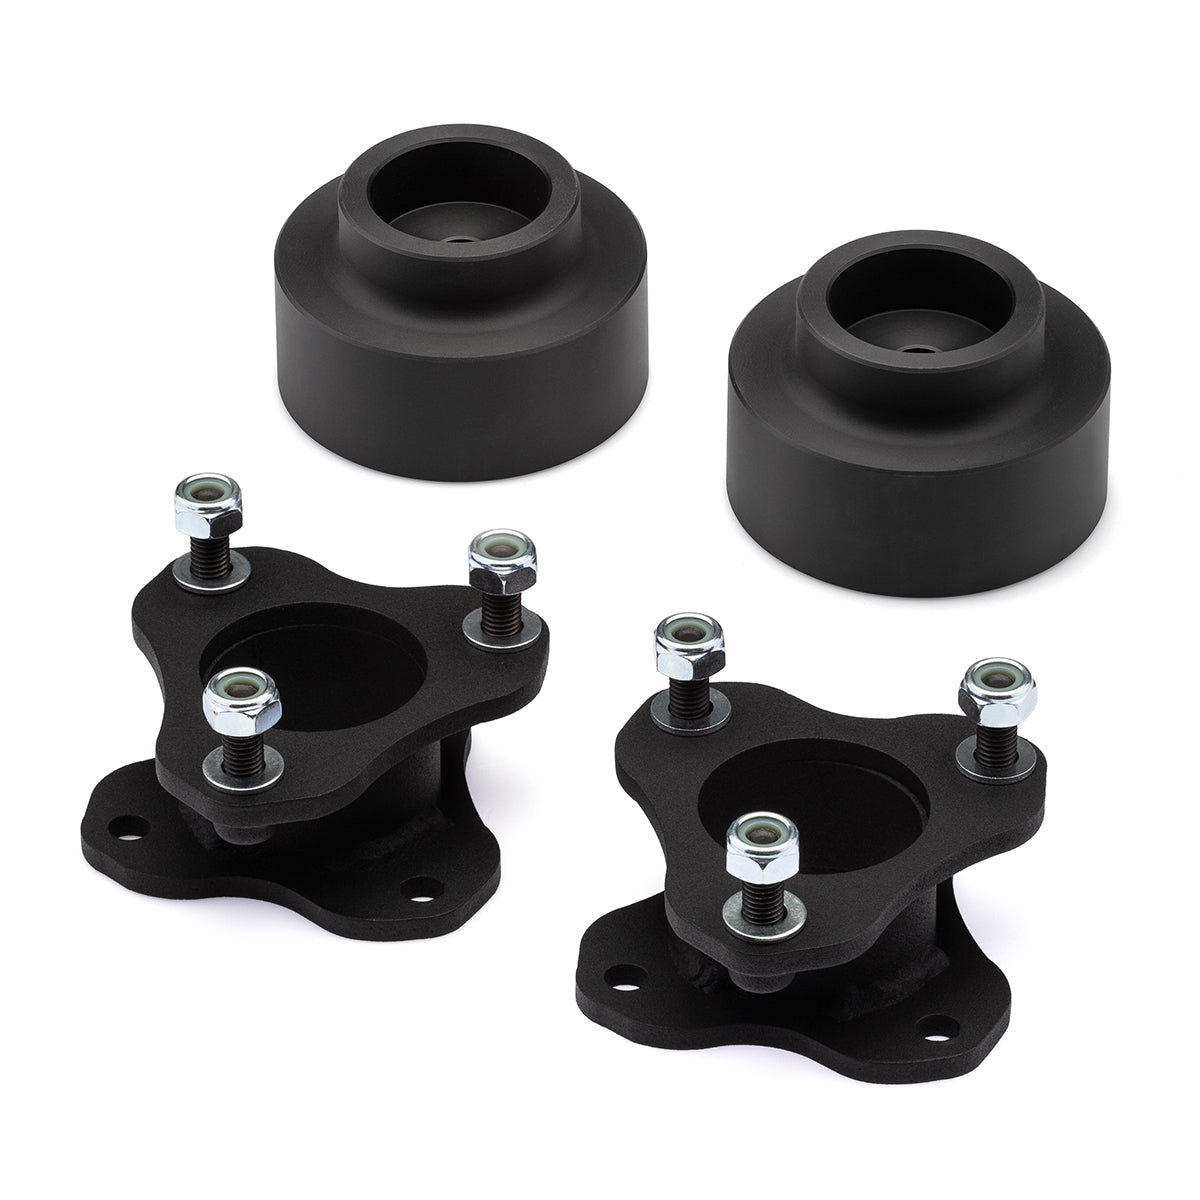 2009-2020 Dodge Ram 1500 Full Steel Front + Rear Spacers Lift Kit 4WD